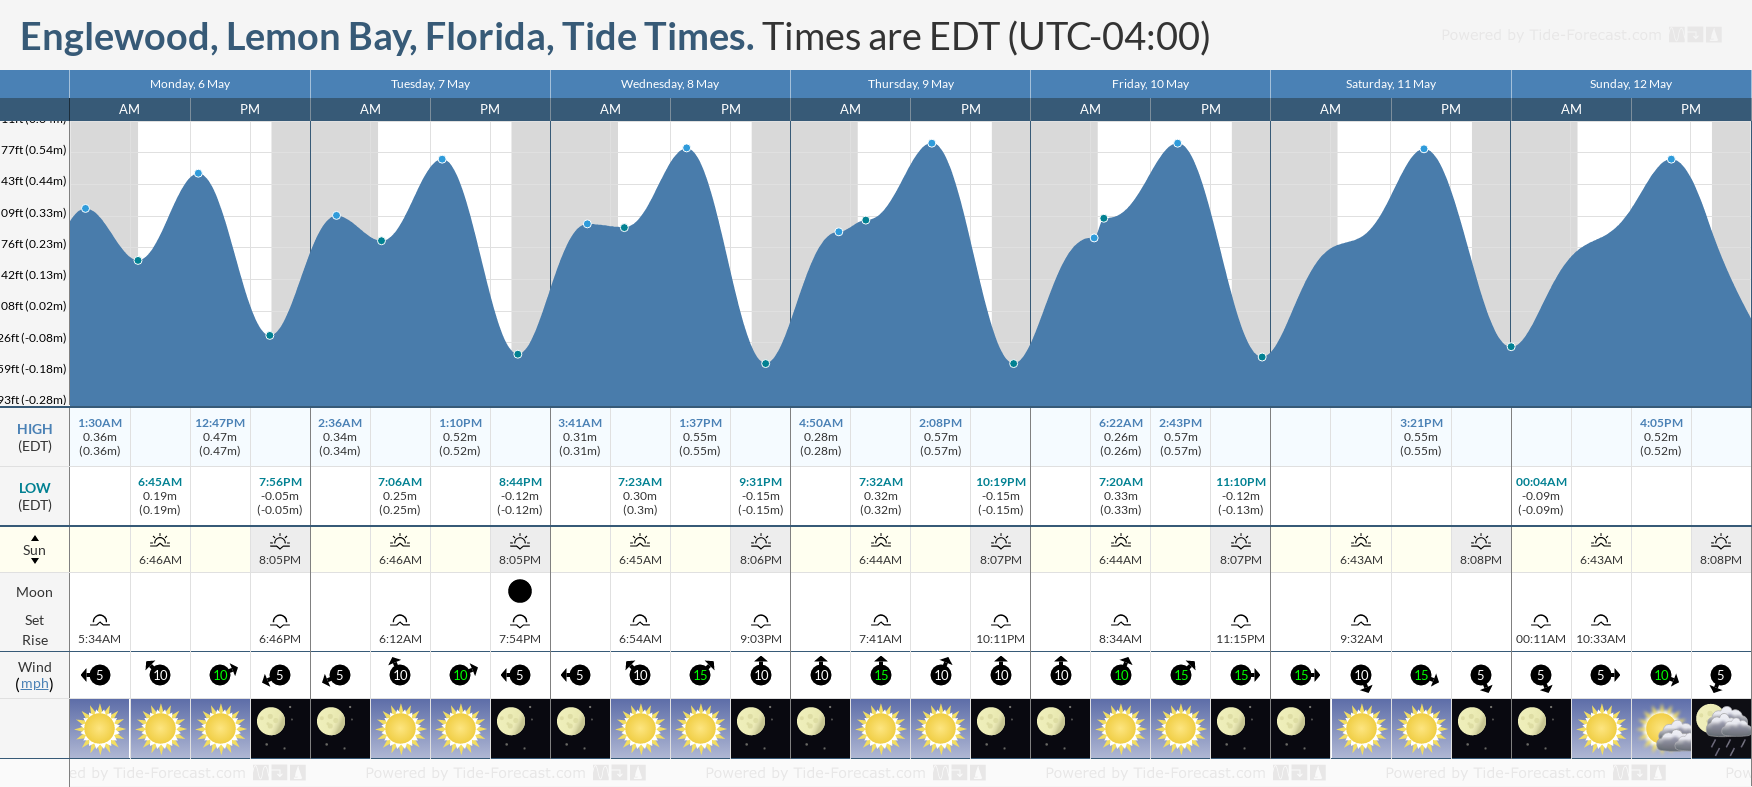 Englewood, Lemon Bay, Florida Tide Chart including high and low tide tide times for the next 7 days